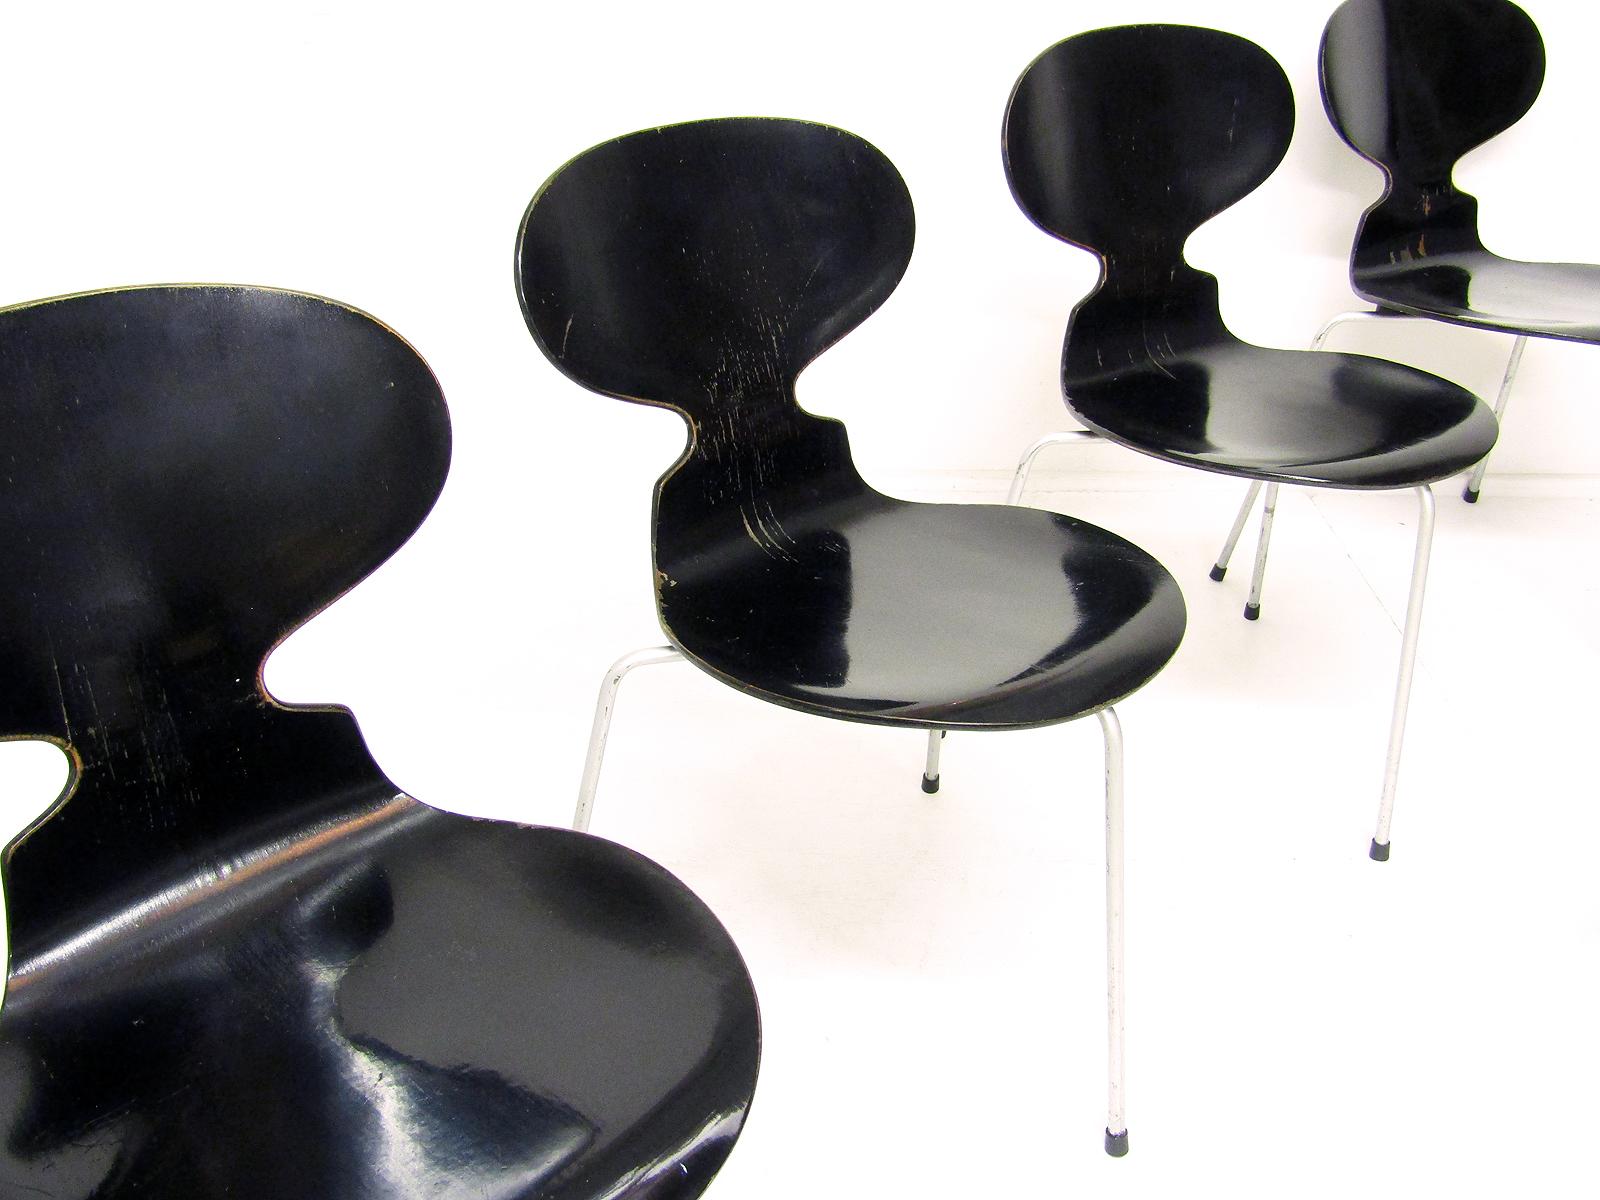 A beautiful set of four black 1950s Ant chairs by Arne Jacobsen for Fritz Hansen.

This very early edition has the original rubber disc spacers underneath, similar to Eames construction. The same detail can be seen on Ant chairs at MOMA and the